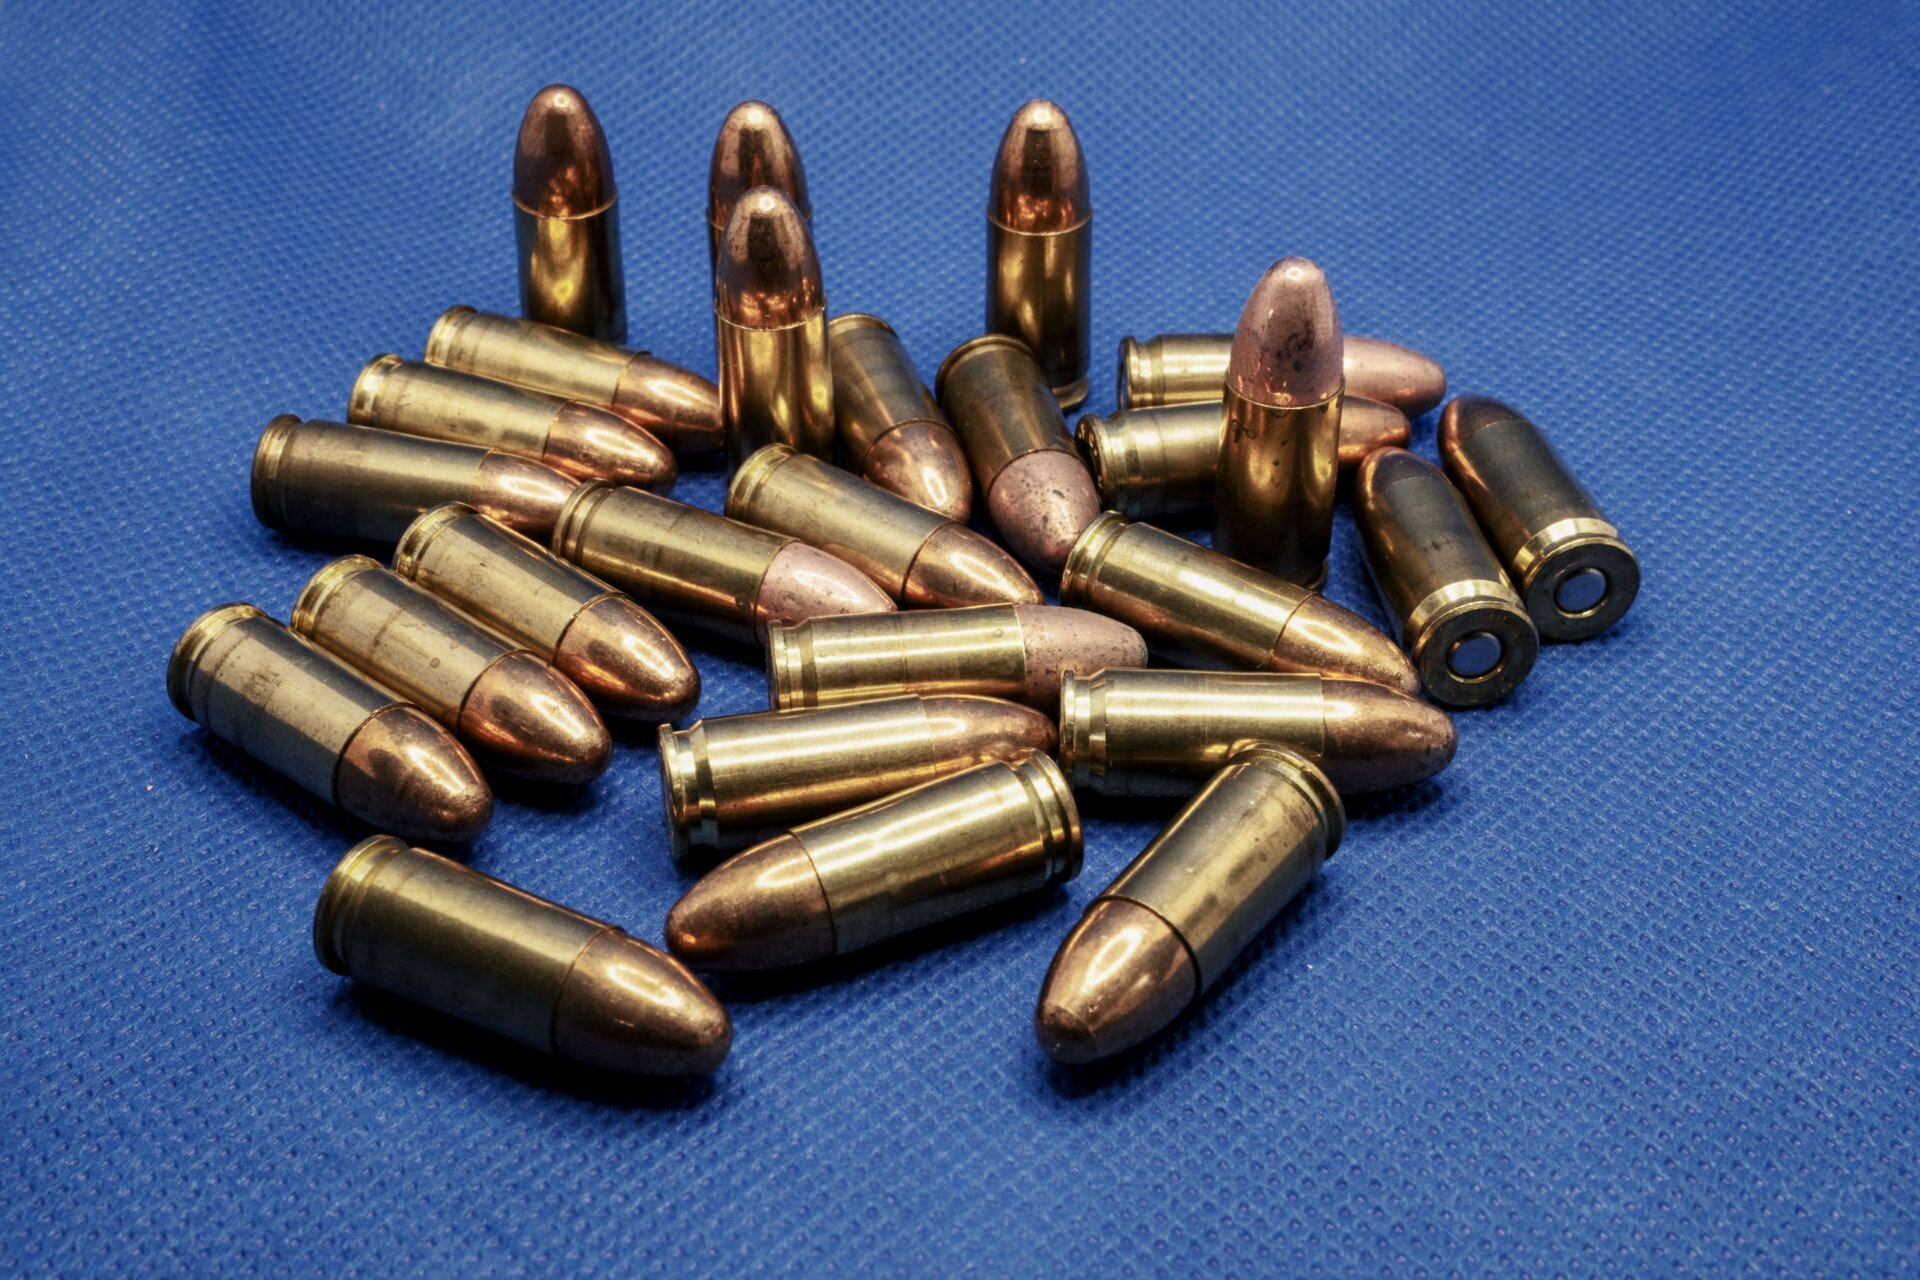 Assorted,9mm,ammunition,bullets,in,a,pile